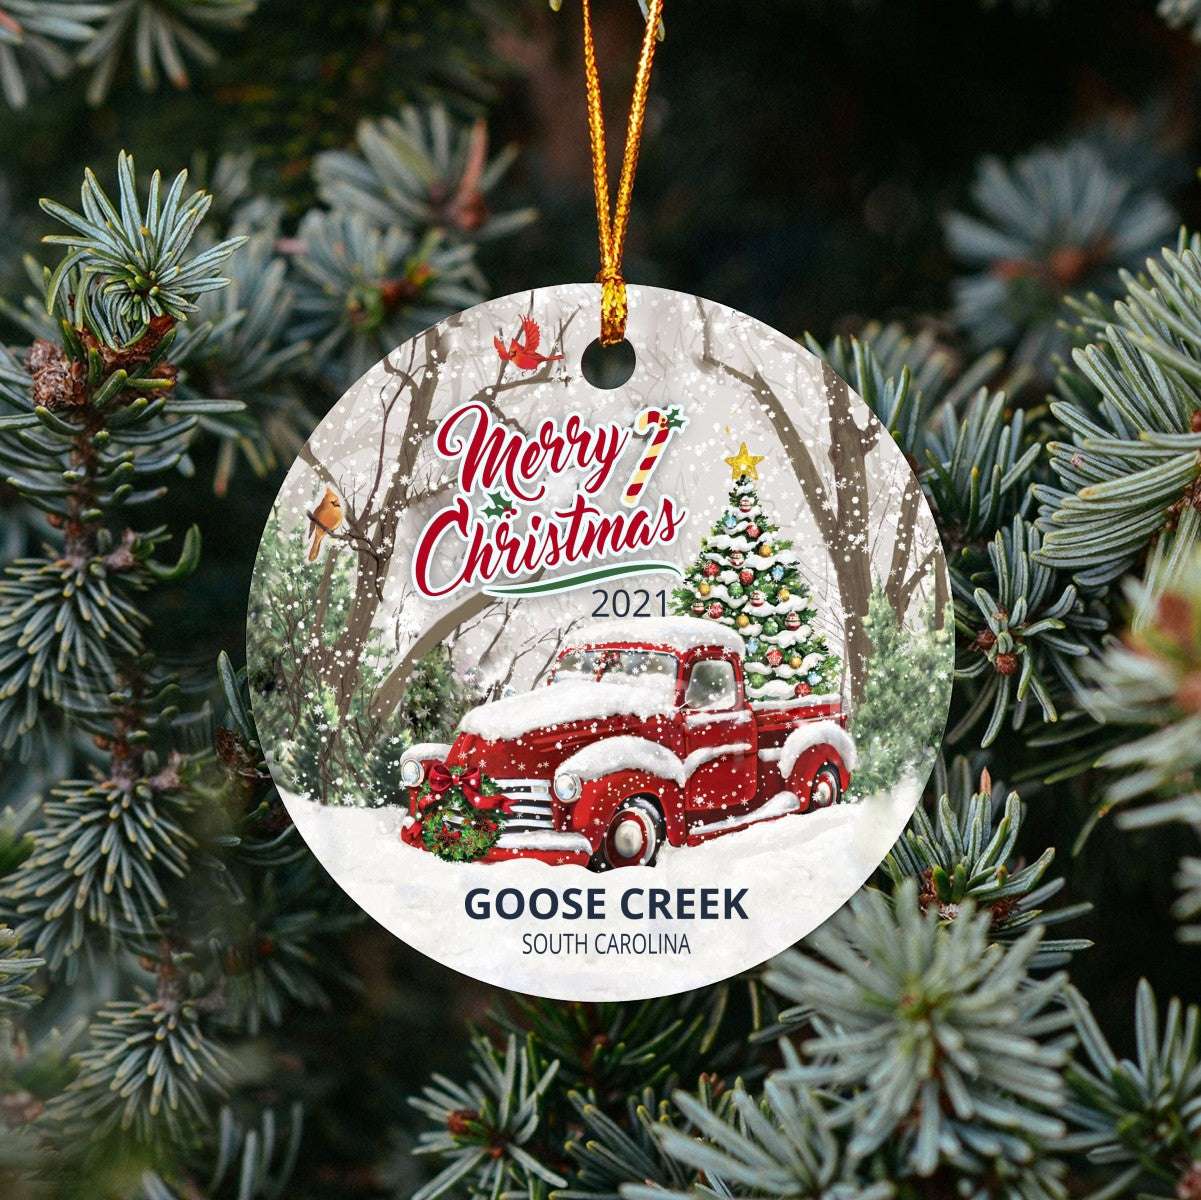 Christmas Tree Ornaments Goose Creek - Ornament Customize With Name City And State Goose Creek South Carolina SC - Red Truck Xmas Ornaments 3'' Plastic Gift For Family, Friend And Housewarming